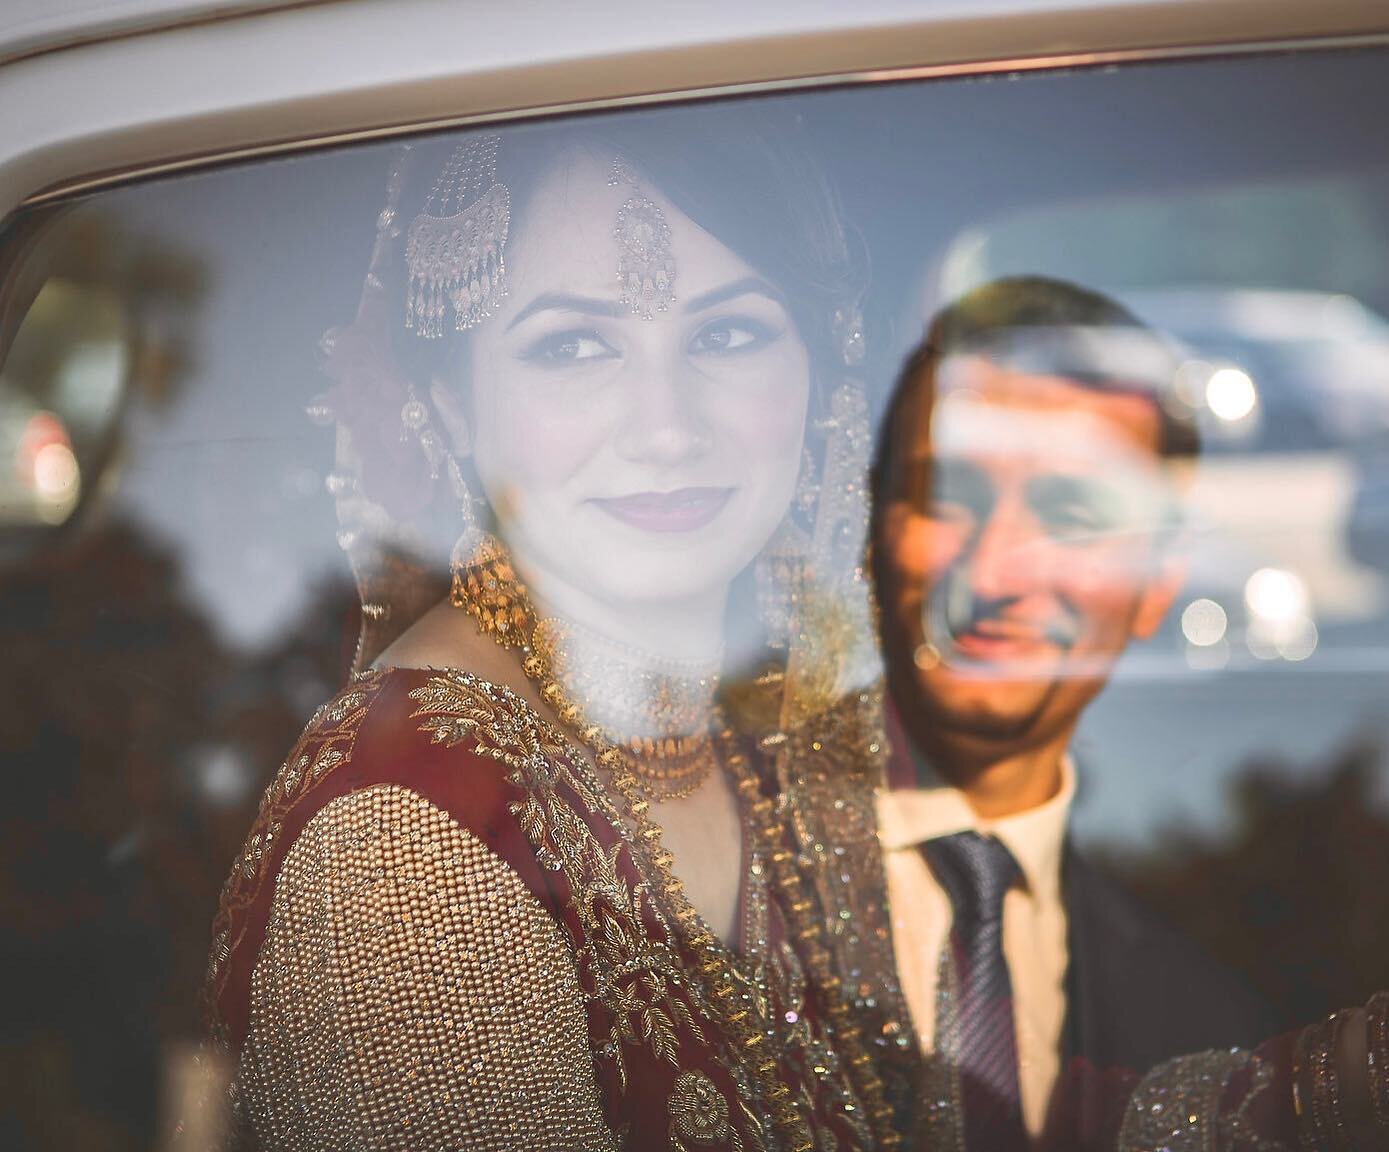 I&rsquo;m just your reflection. #weddingphotography #weddingking #vancity #vancouverweddingphotographer #weddingcouple #bookingweddings #weddingphotog  #vancouverphotos #Bridalportraits #Brides #vancouverweddingphotography #Bride #southasianwedding #